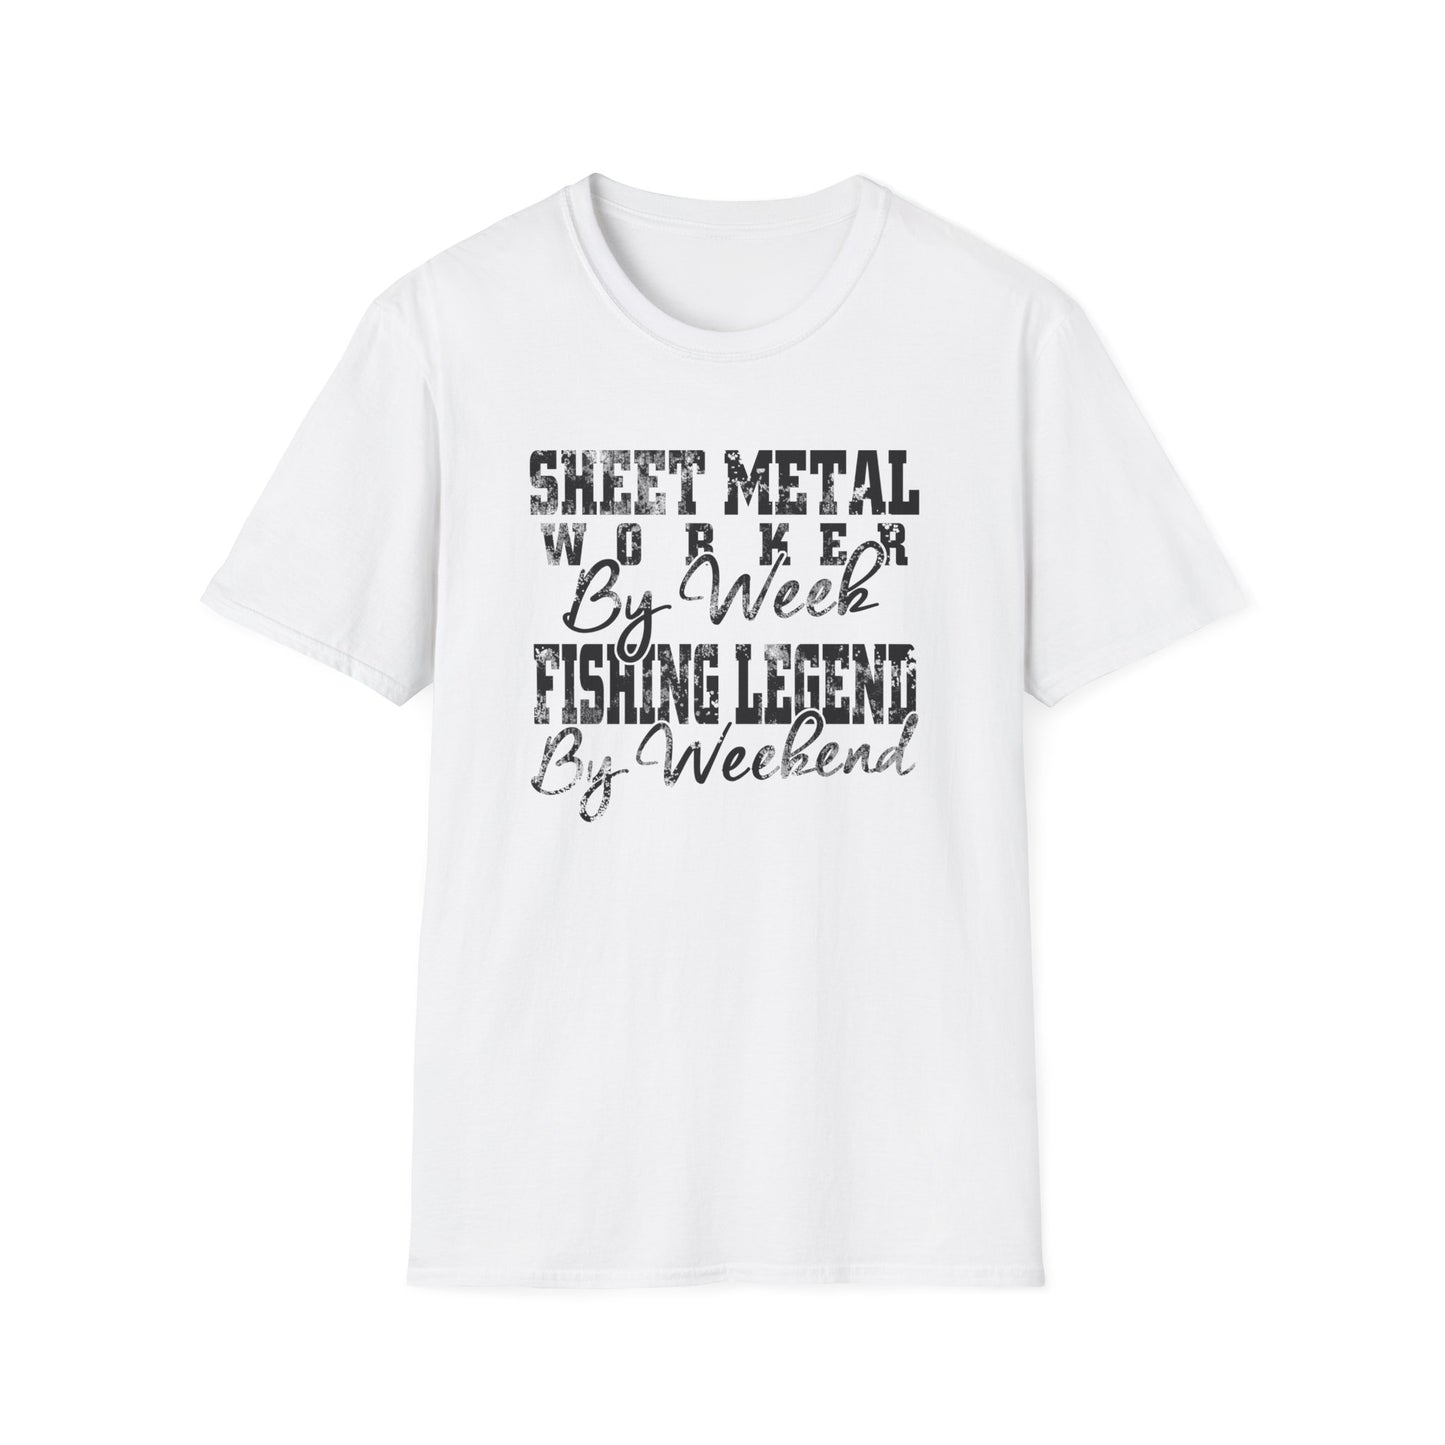 Unleash Your Dual Identity with Our Sheet Metal Worker by Week, Fishing Legend by Weekend T-Shirt